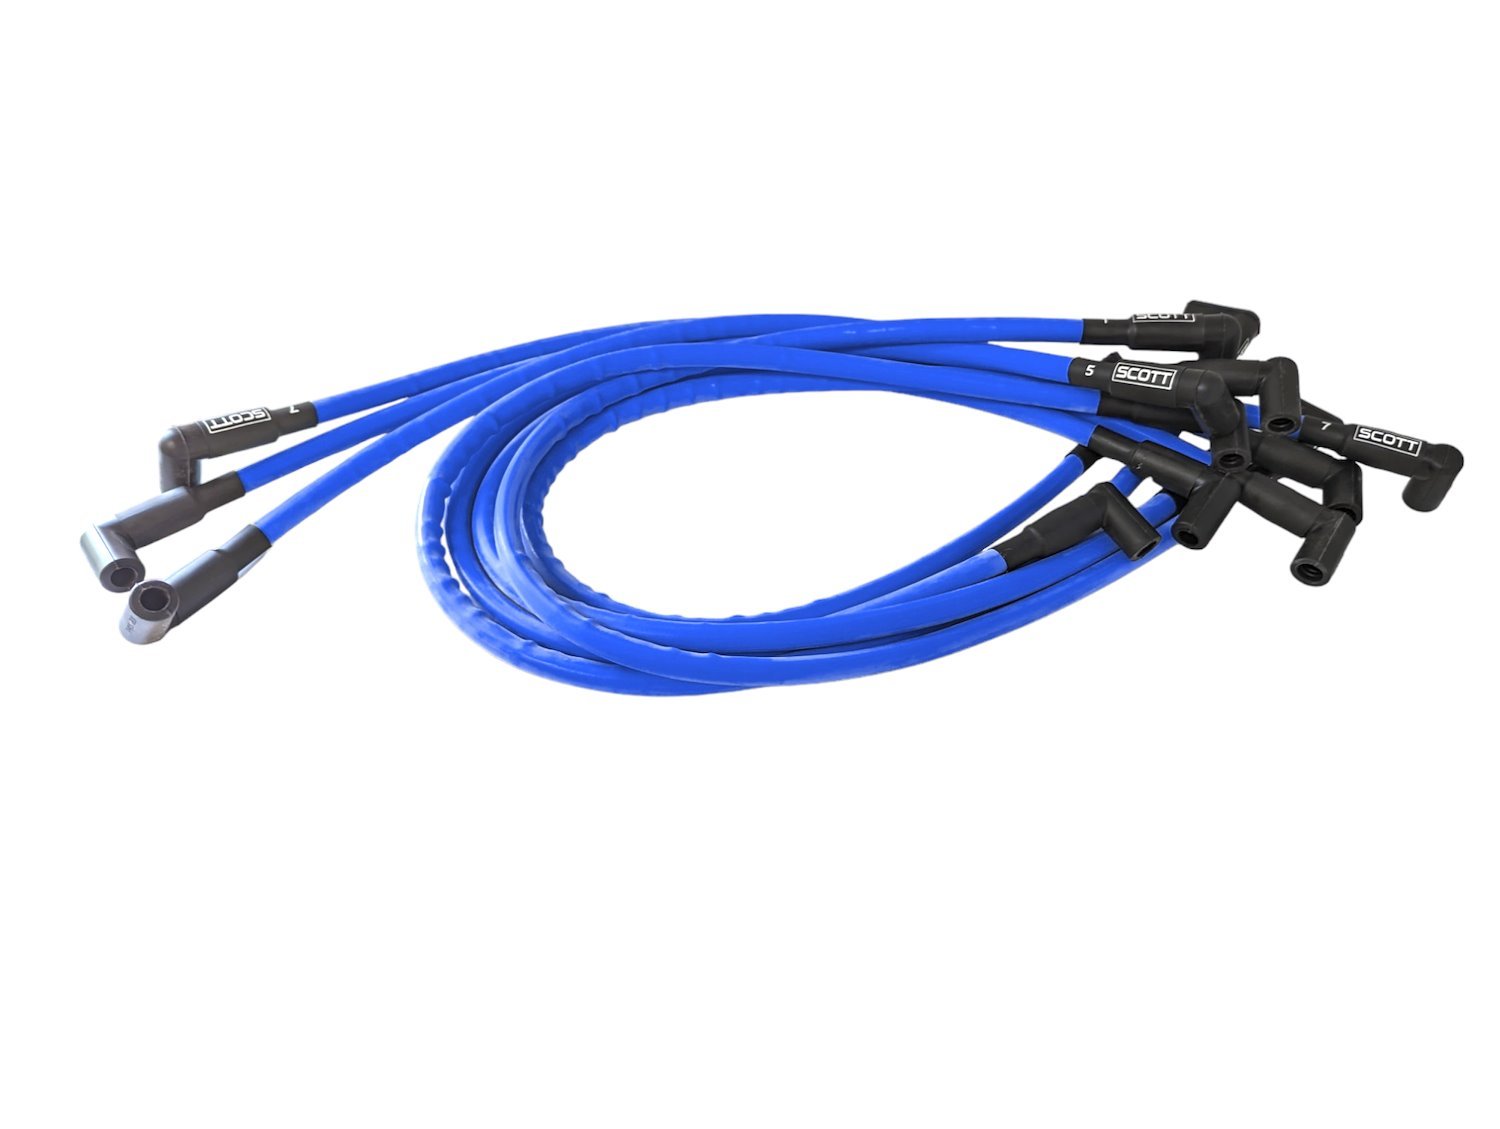 SPW-CH-530-4 High-Performance Silicone-Sleeved Spark Plug Wire Set for Big Block Ford, Under Header [Blue]